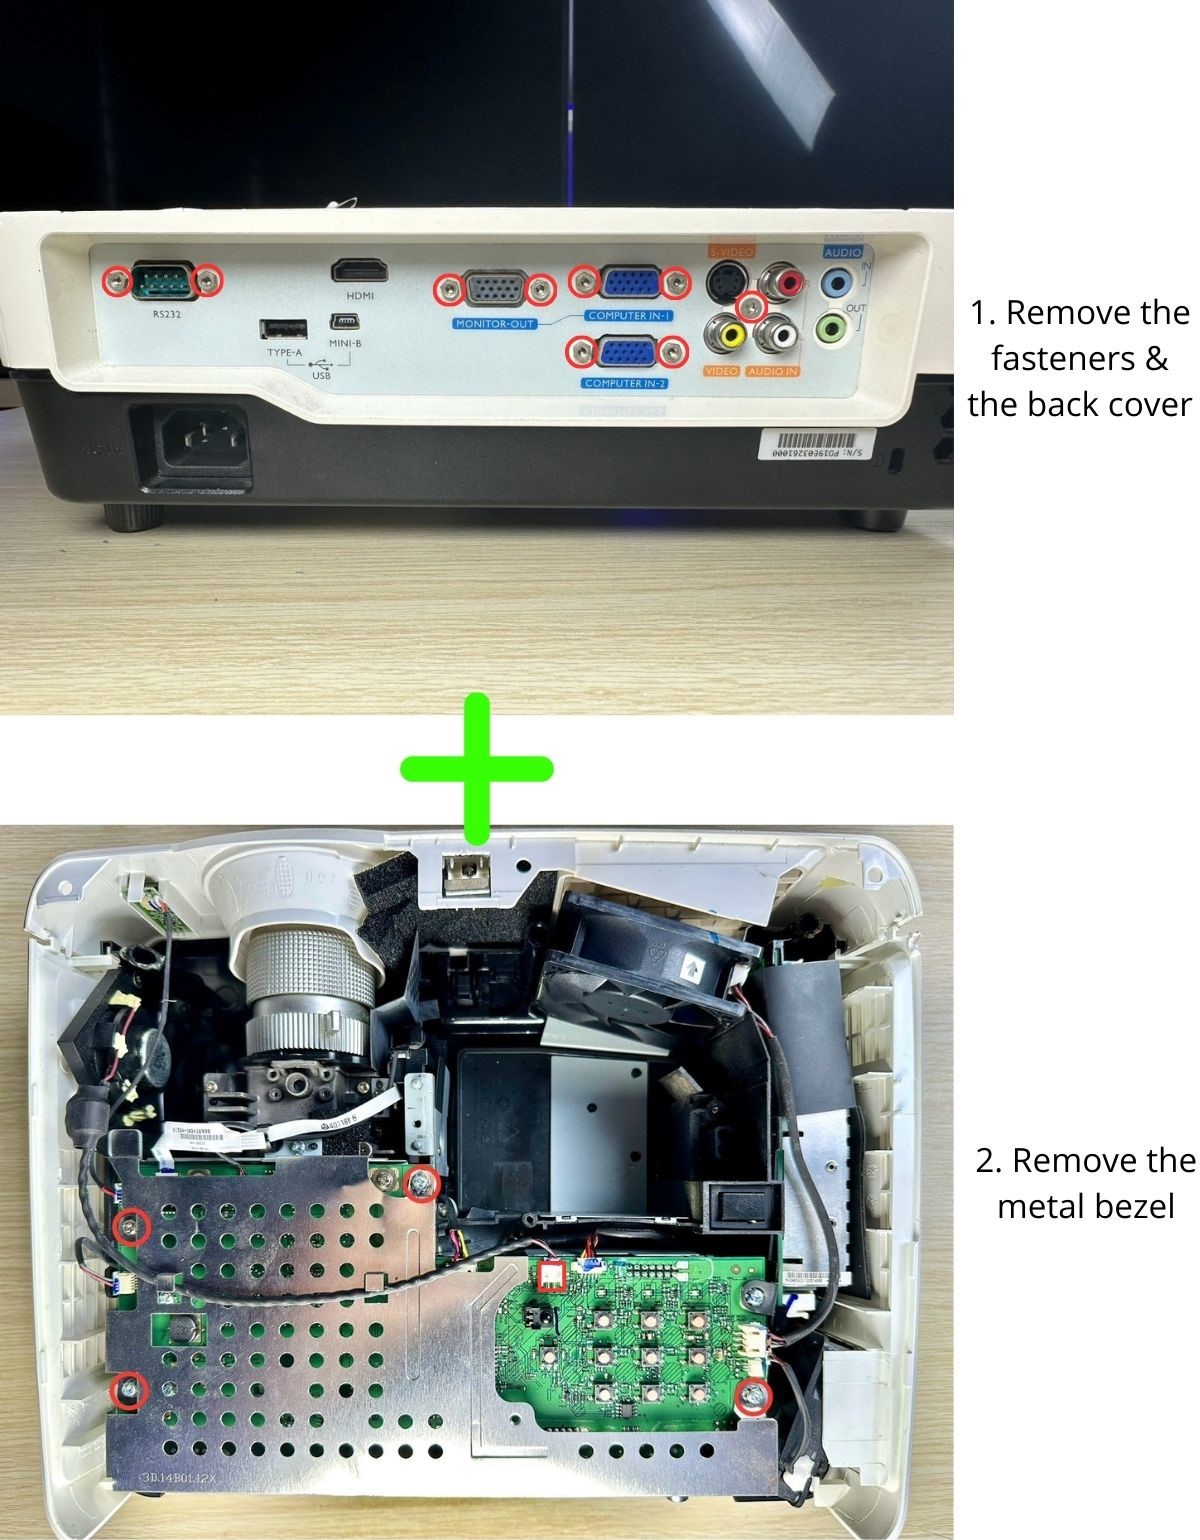 remove the back cover & metal bezel of a benq projector